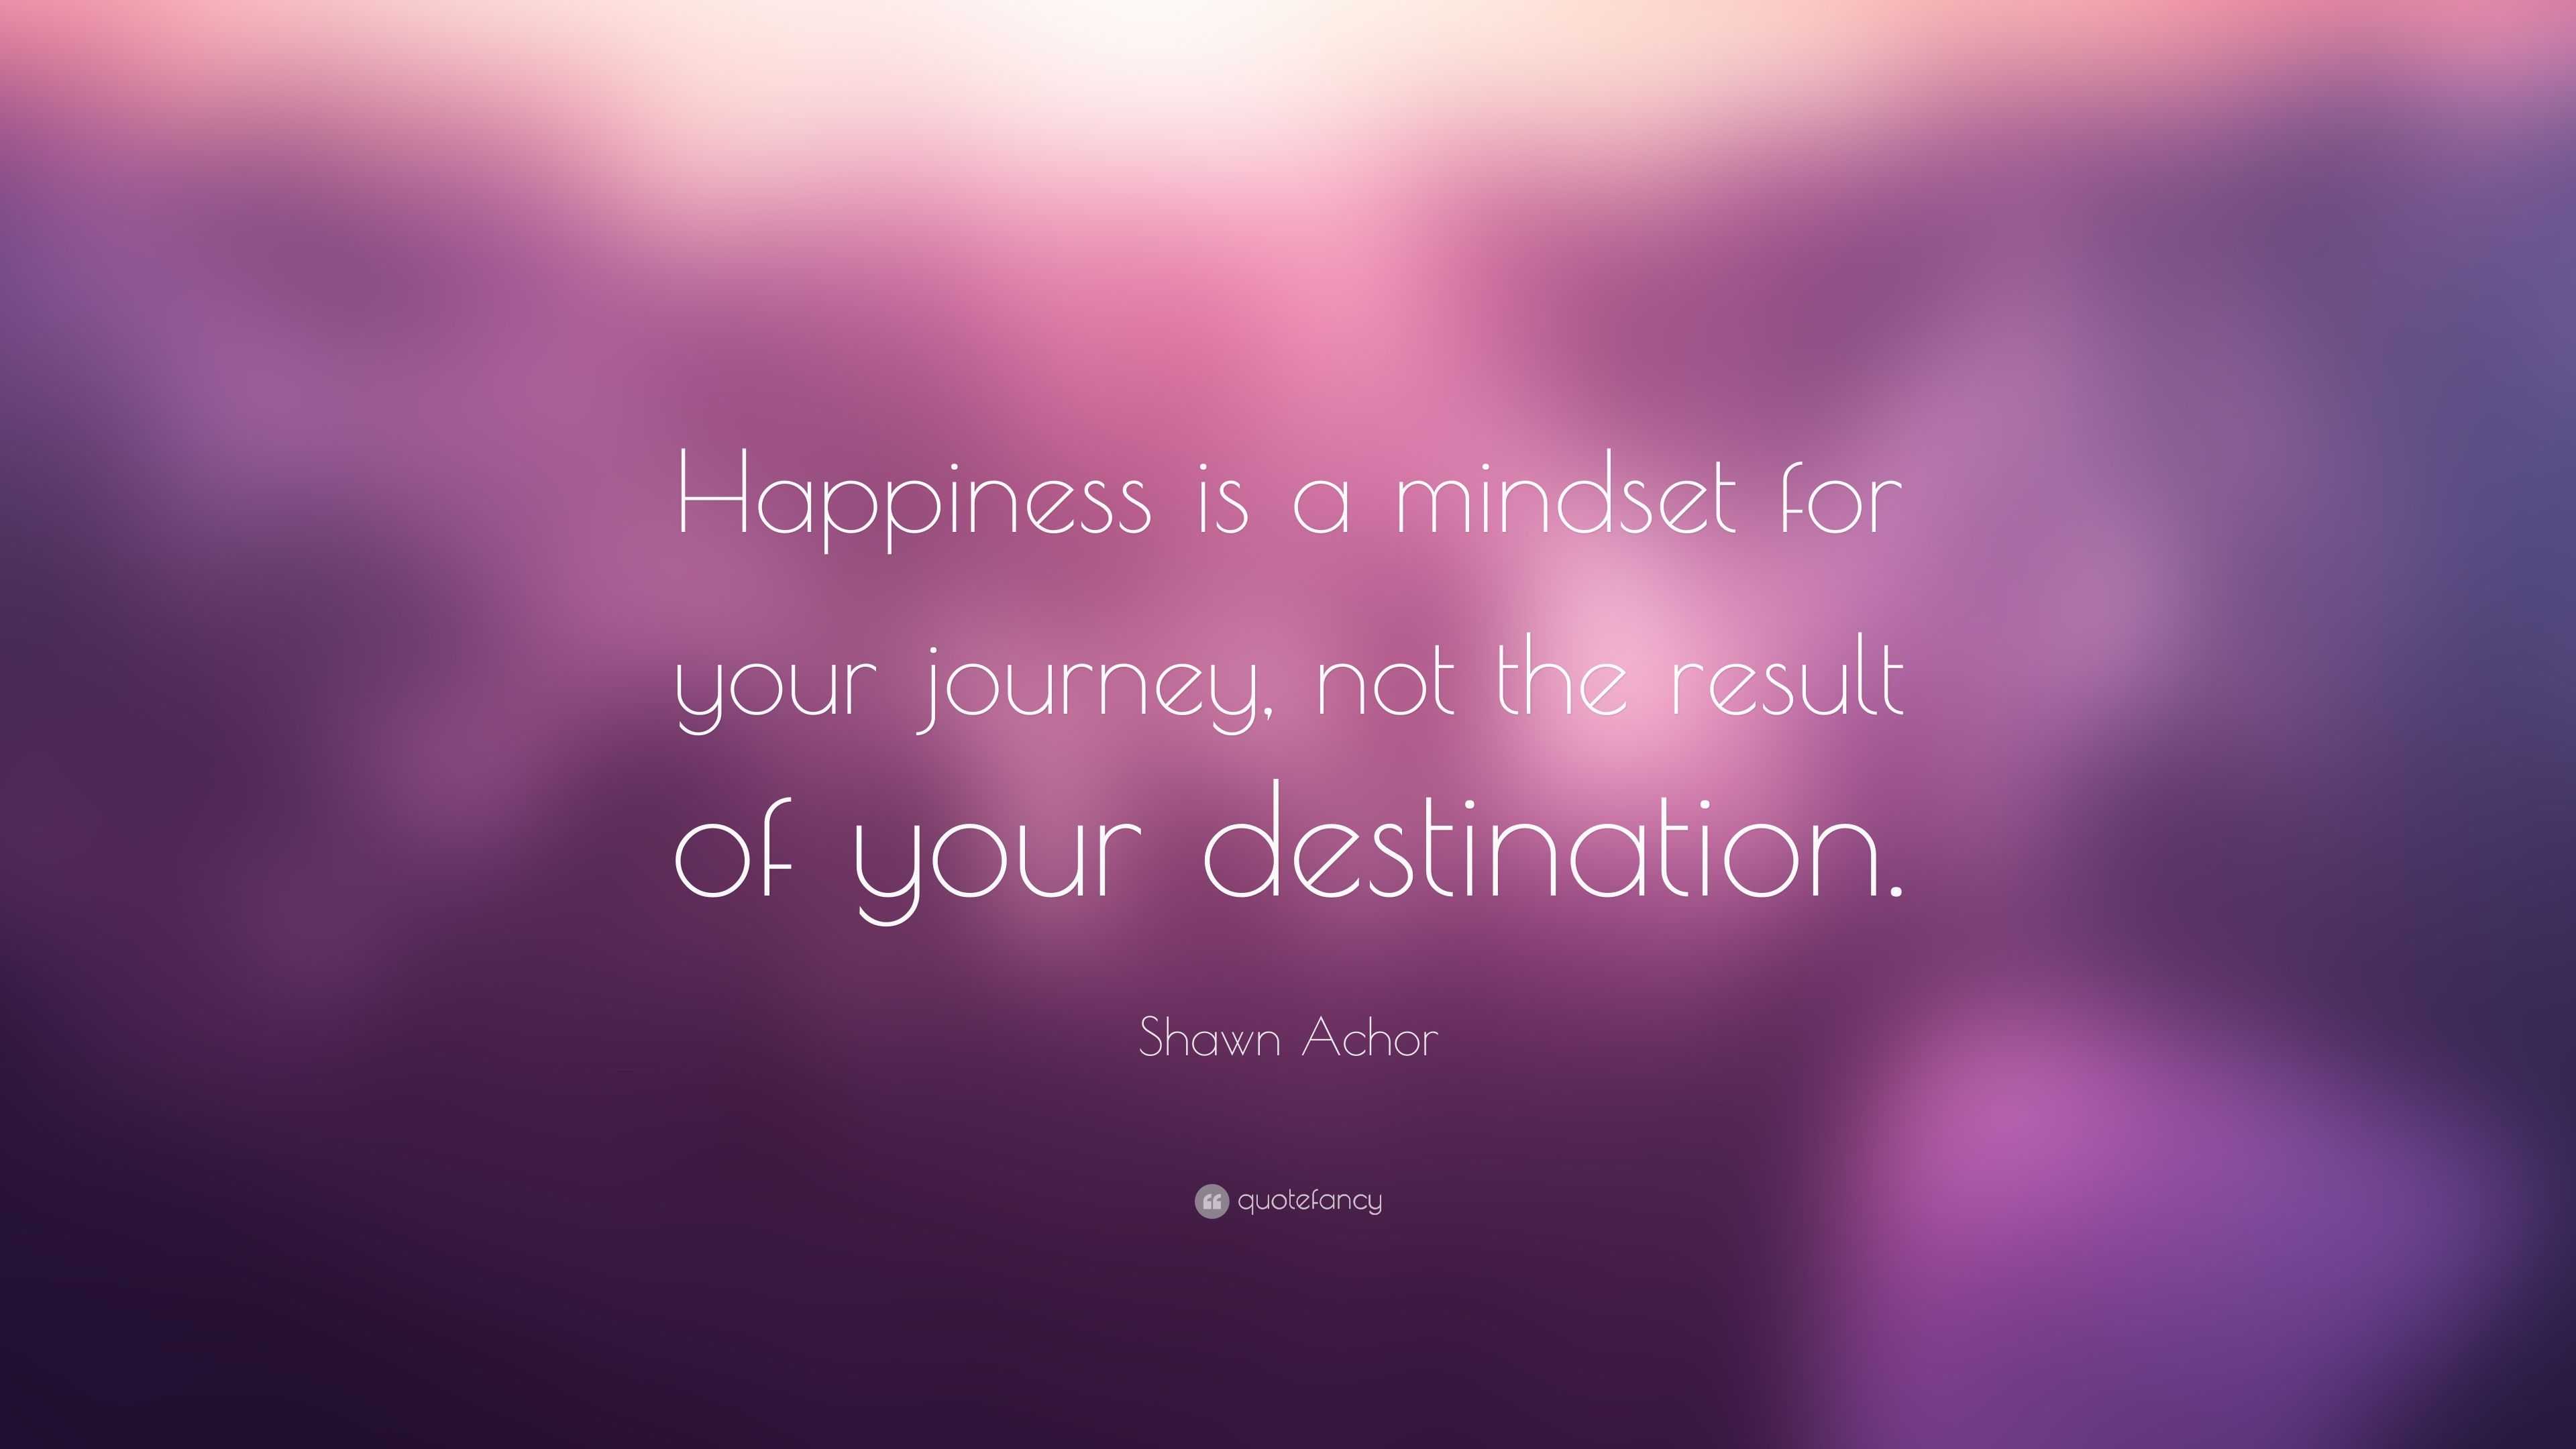 Shawn Achor Quote: “Happiness is a mindset for your journey, not the ...